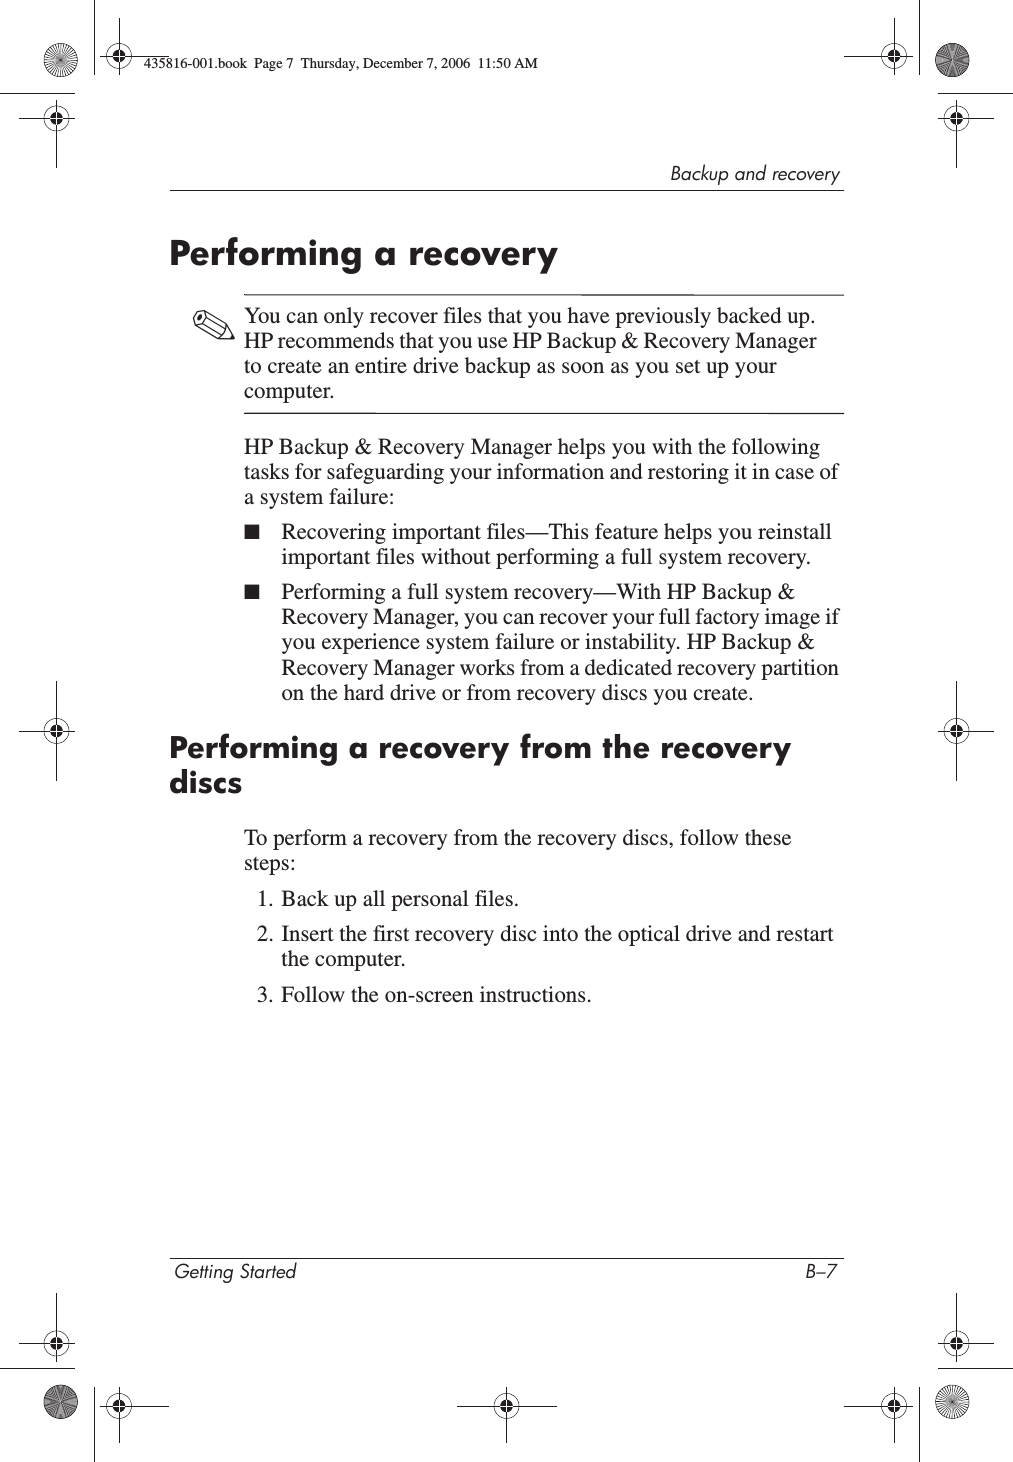 Backup and recoveryGetting Started B–7Performing a recovery✎You can only recover files that you have previously backed up. HP recommends that you use HP Backup &amp; Recovery Manager to create an entire drive backup as soon as you set up your computer.HP Backup &amp; Recovery Manager helps you with the following tasks for safeguarding your information and restoring it in case of a system failure:■Recovering important files—This feature helps you reinstall important files without performing a full system recovery.■Performing a full system recovery—With HP Backup &amp; Recovery Manager, you can recover your full factory image if you experience system failure or instability. HP Backup &amp; Recovery Manager works from a dedicated recovery partition on the hard drive or from recovery discs you create.Performing a recovery from the recovery discsTo perform a recovery from the recovery discs, follow these steps:1. Back up all personal files. 2. Insert the first recovery disc into the optical drive and restart the computer.3. Follow the on-screen instructions. 435816-001.book  Page 7  Thursday, December 7, 2006  11:50 AM